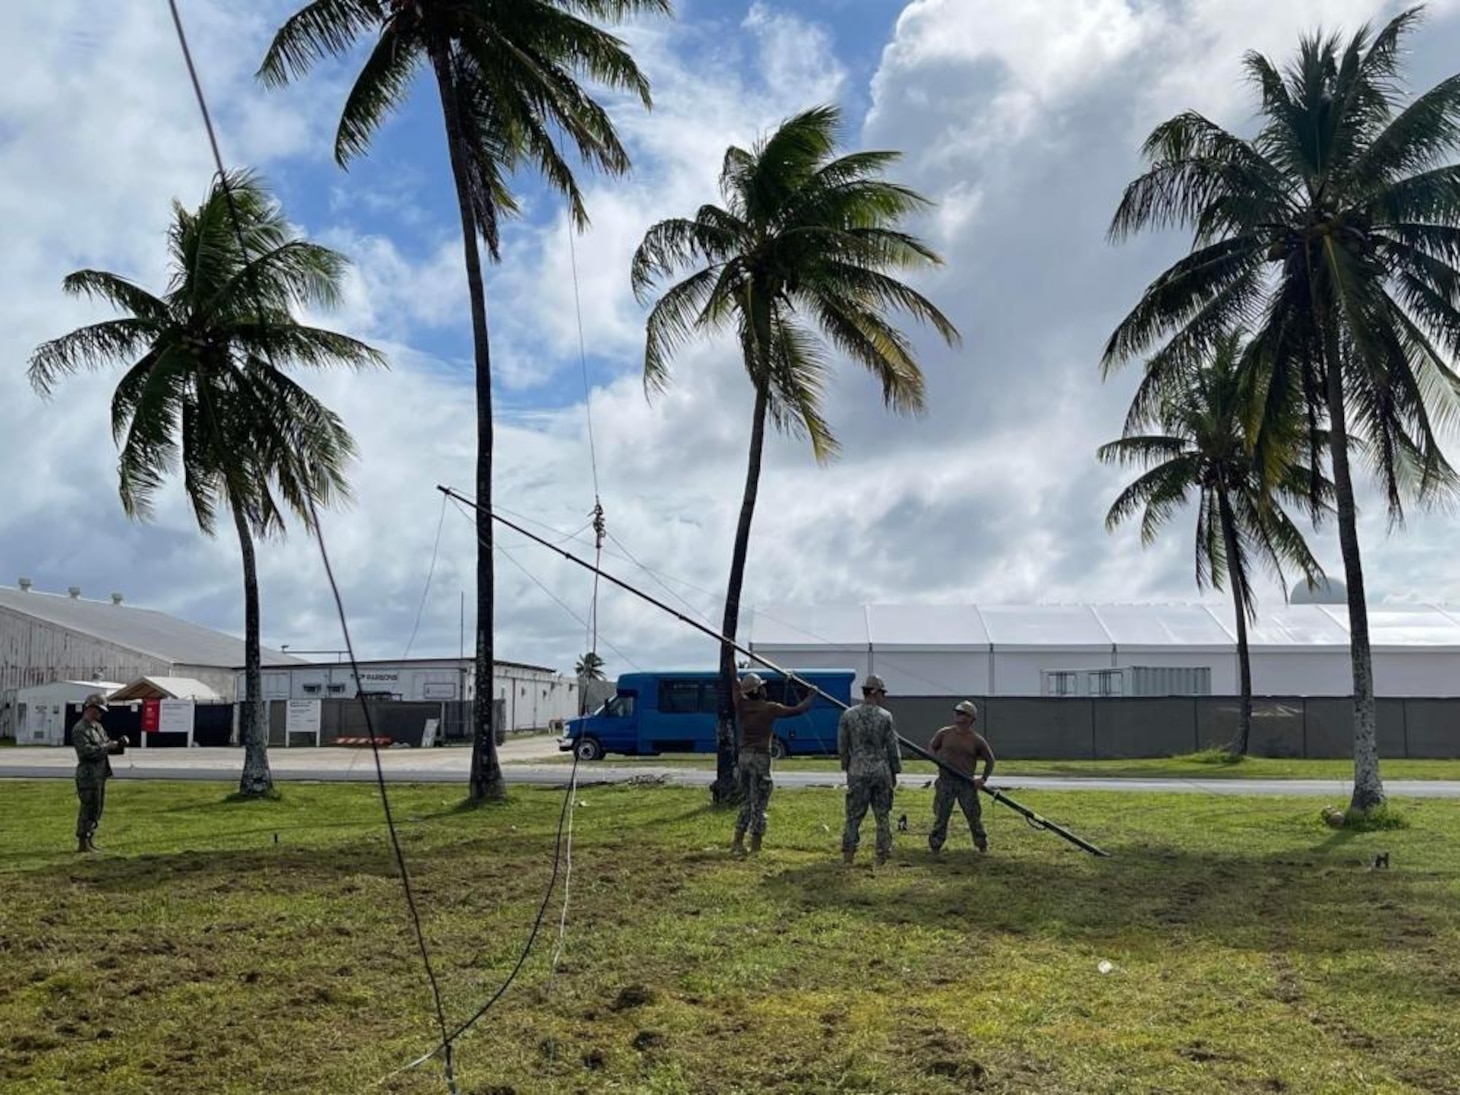 211122-N-CE120-1003 KWAJALEIN, Marshall Islands (Nov. 14, 2021) U.S. Navy Seabees with Naval Mobile Construction Battalion (NMCB) 5 set up an antenna during a joint Communications Exercise at Kwajalein, Marshall Islands. The U.S. Navy Seabees assigned to NMCB-5 are deployed to the U.S. 7th Fleet area of operations, supporting a free and open Indo-Pacific, strengthening their network of alliances and partnerships, and providing general engineering and civil support to joint operational forces. Homeported out of Port Hueneme, California, NMCB-5 has 13 detail sites deployed throughout the U.S. and Indo-Pacific area of operations. (U.S. Navy photo by Equipment Operator 2nd Class Brandon Blevins)